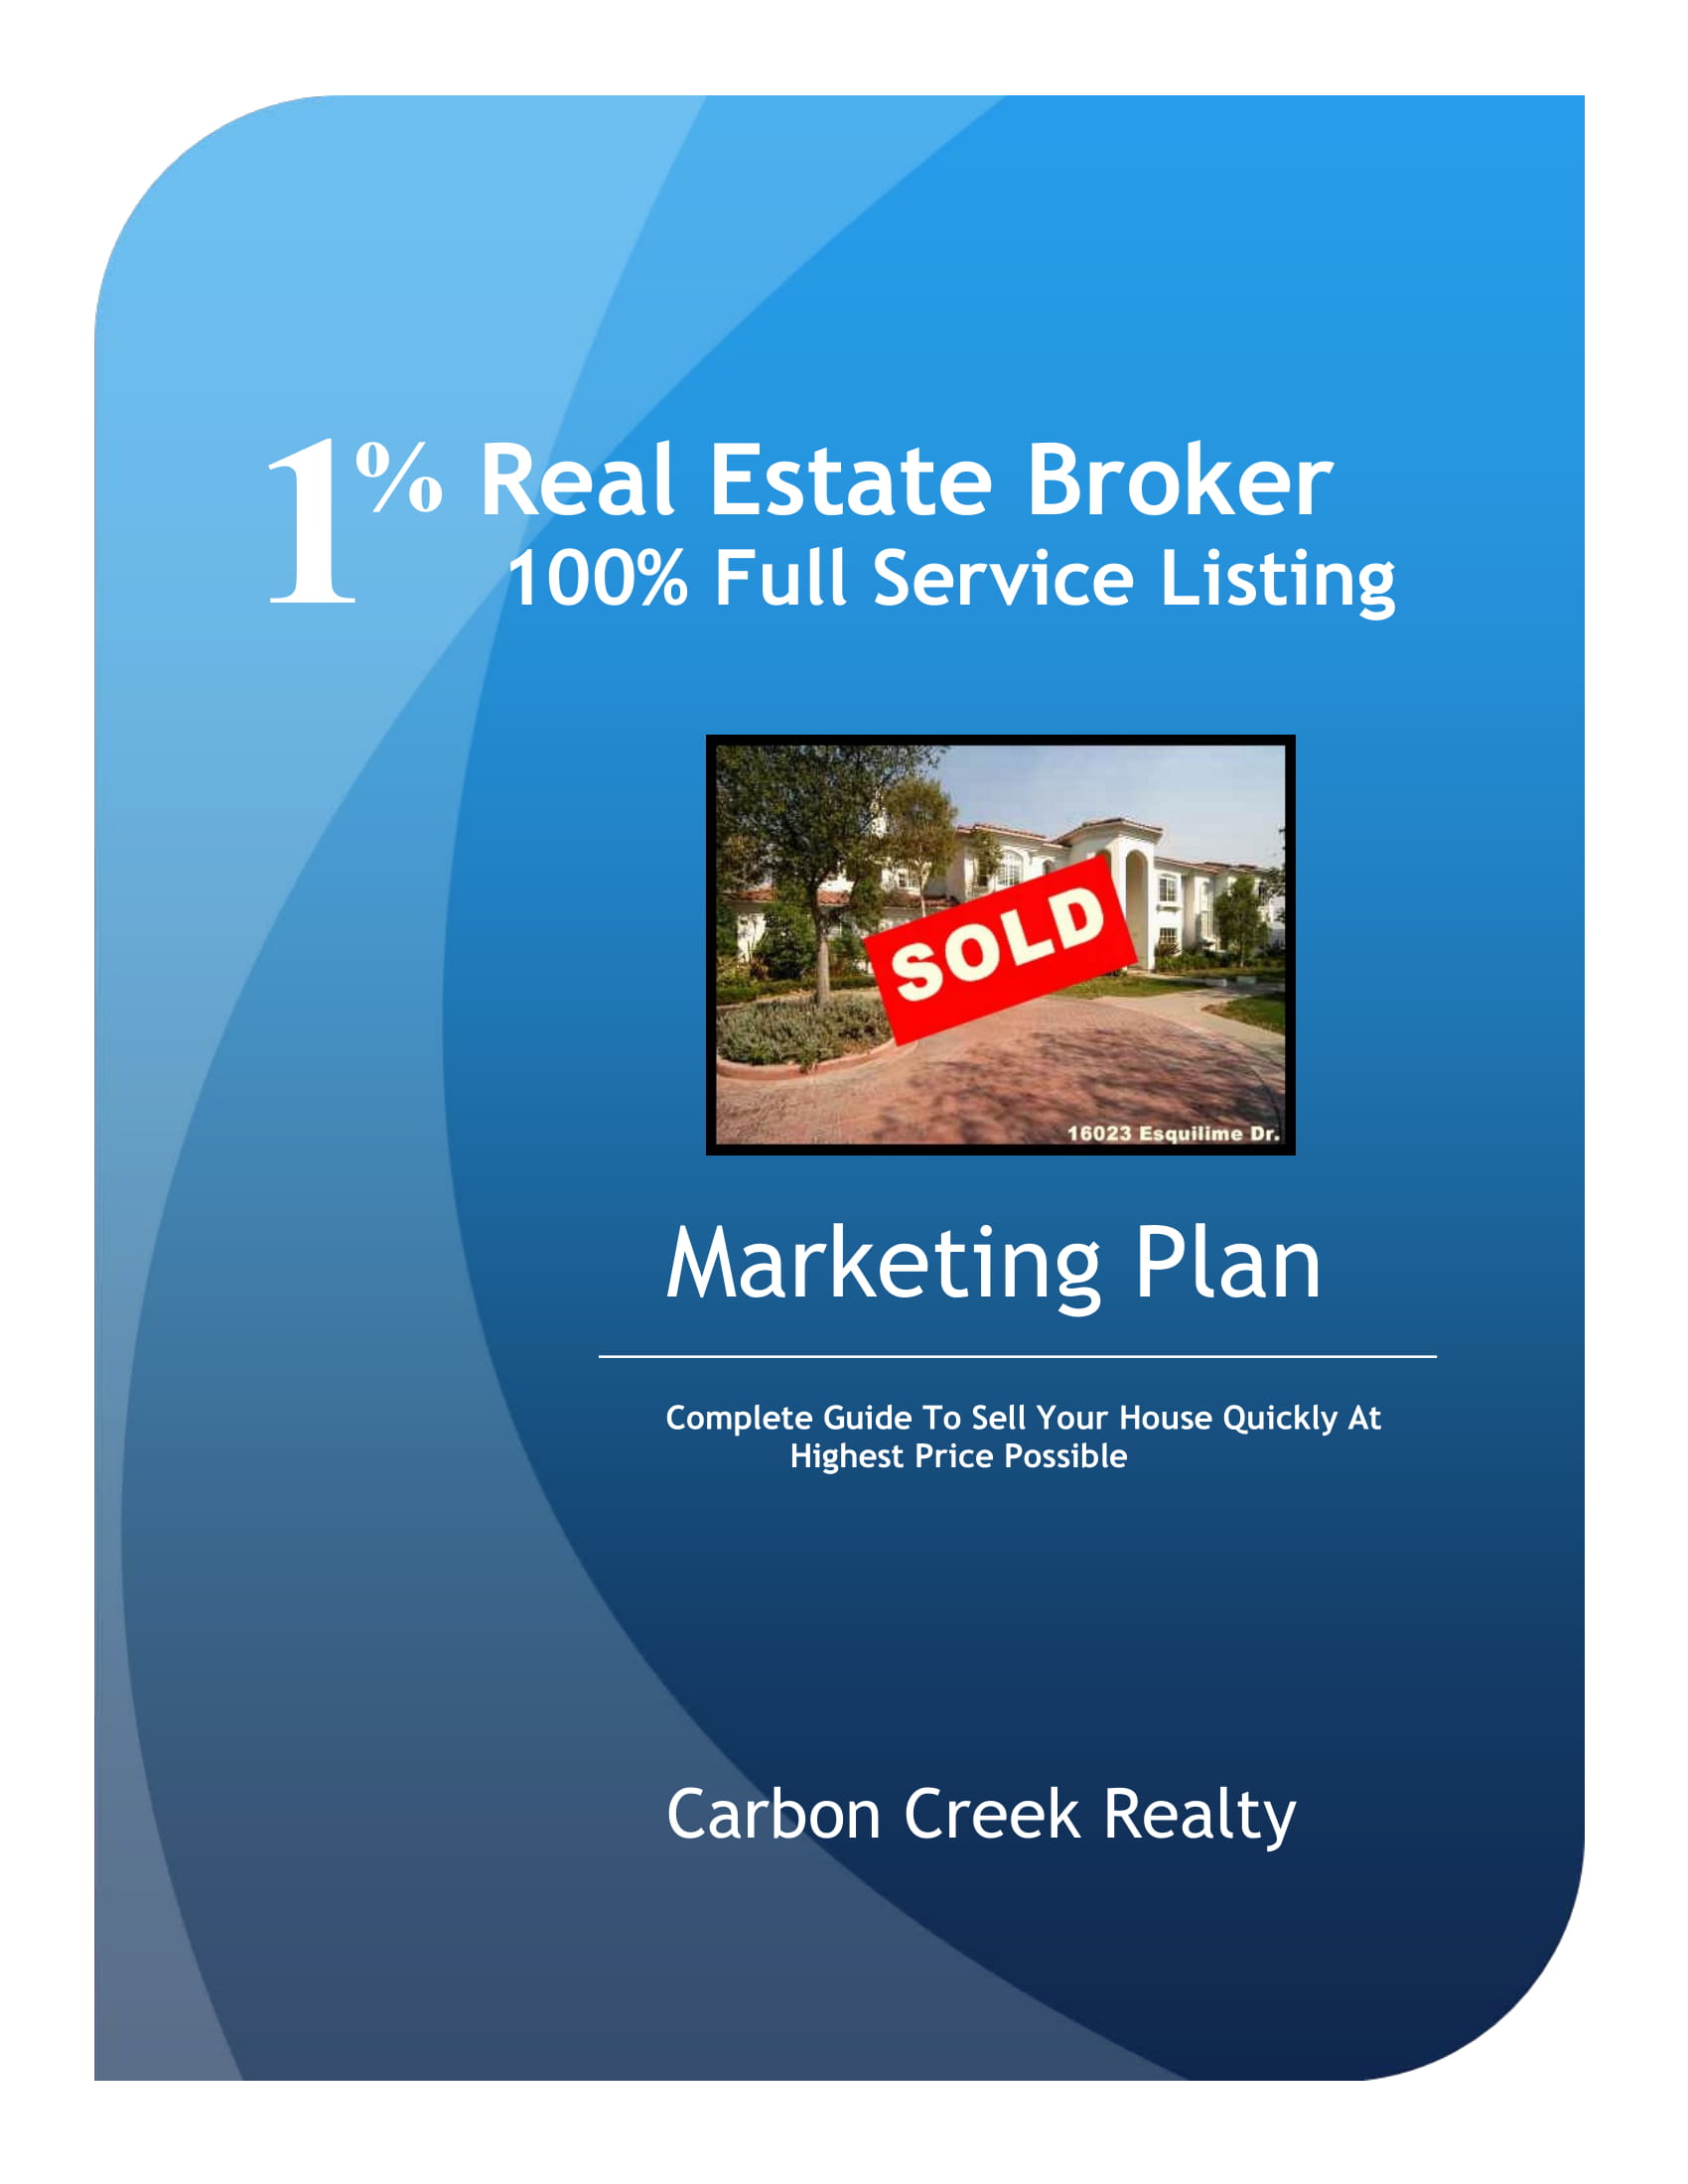 9+ Real Estate Investor Marketing Plan Examples - PDF | Examples